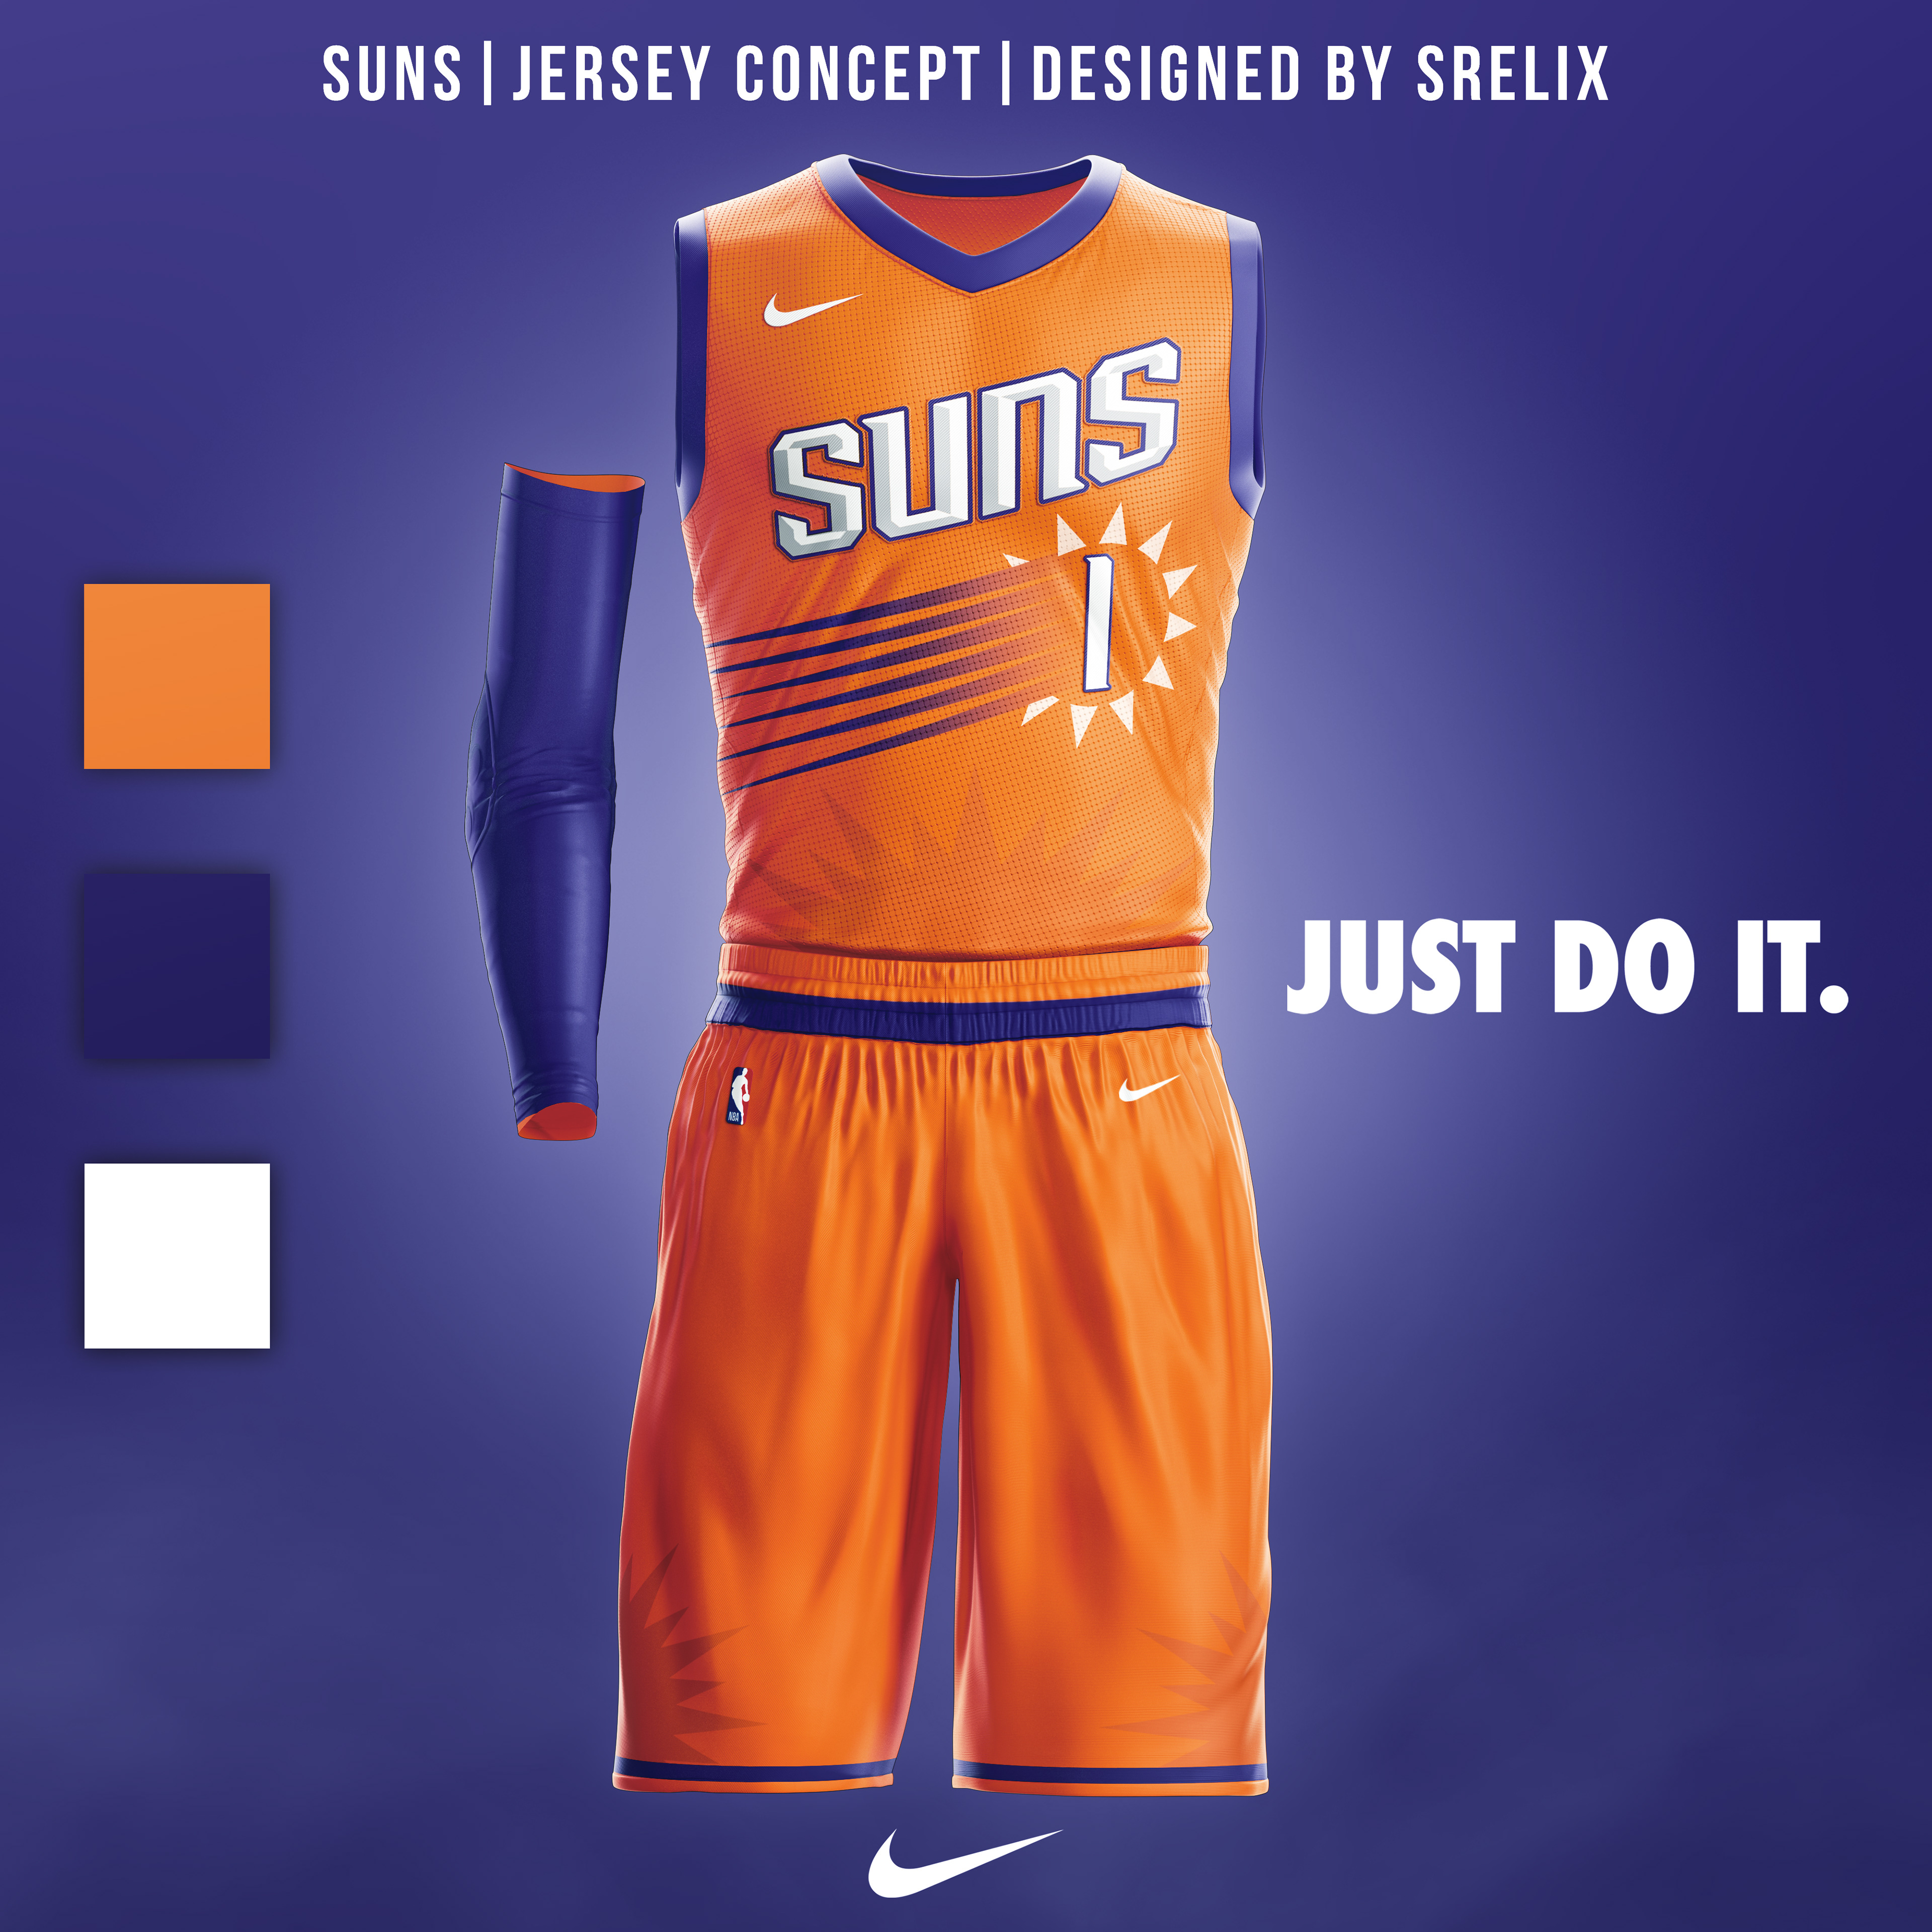 These NBA Concept Jerseys For Orlando Are A Great Idea